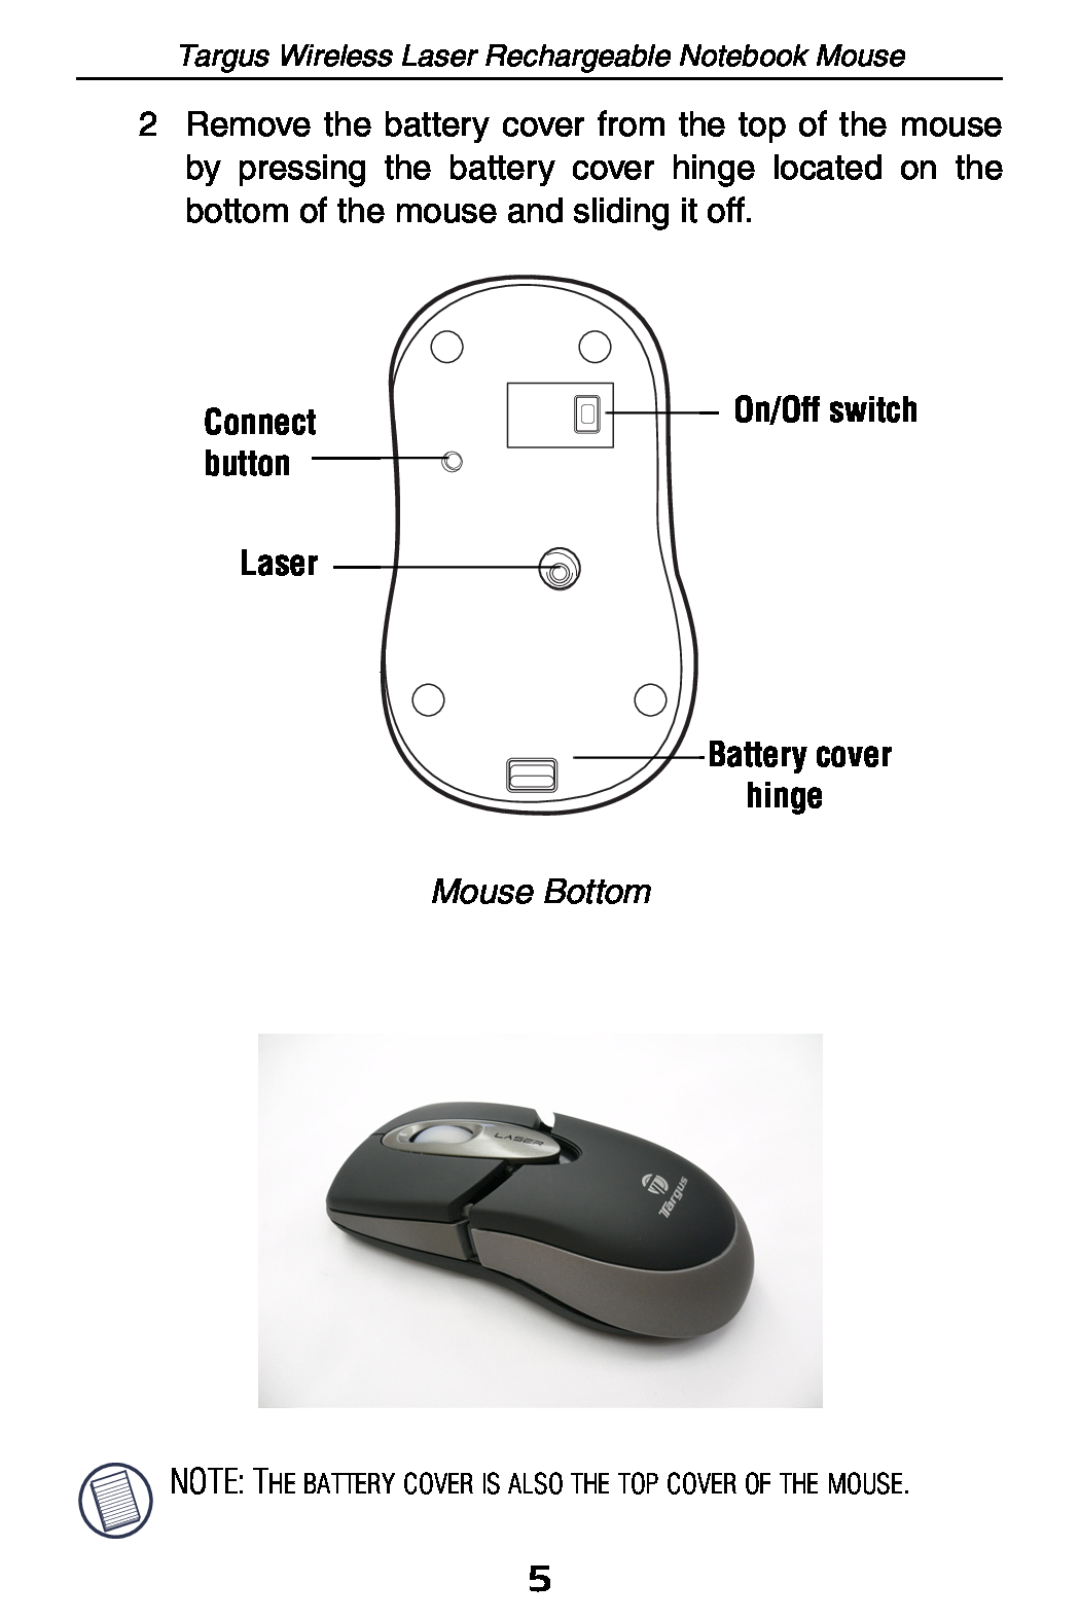 Targus 410-0008-001A On/Off switch, Mouse Bottom, Connect button, Targus Wireless Laser Rechargeable Notebook Mouse 